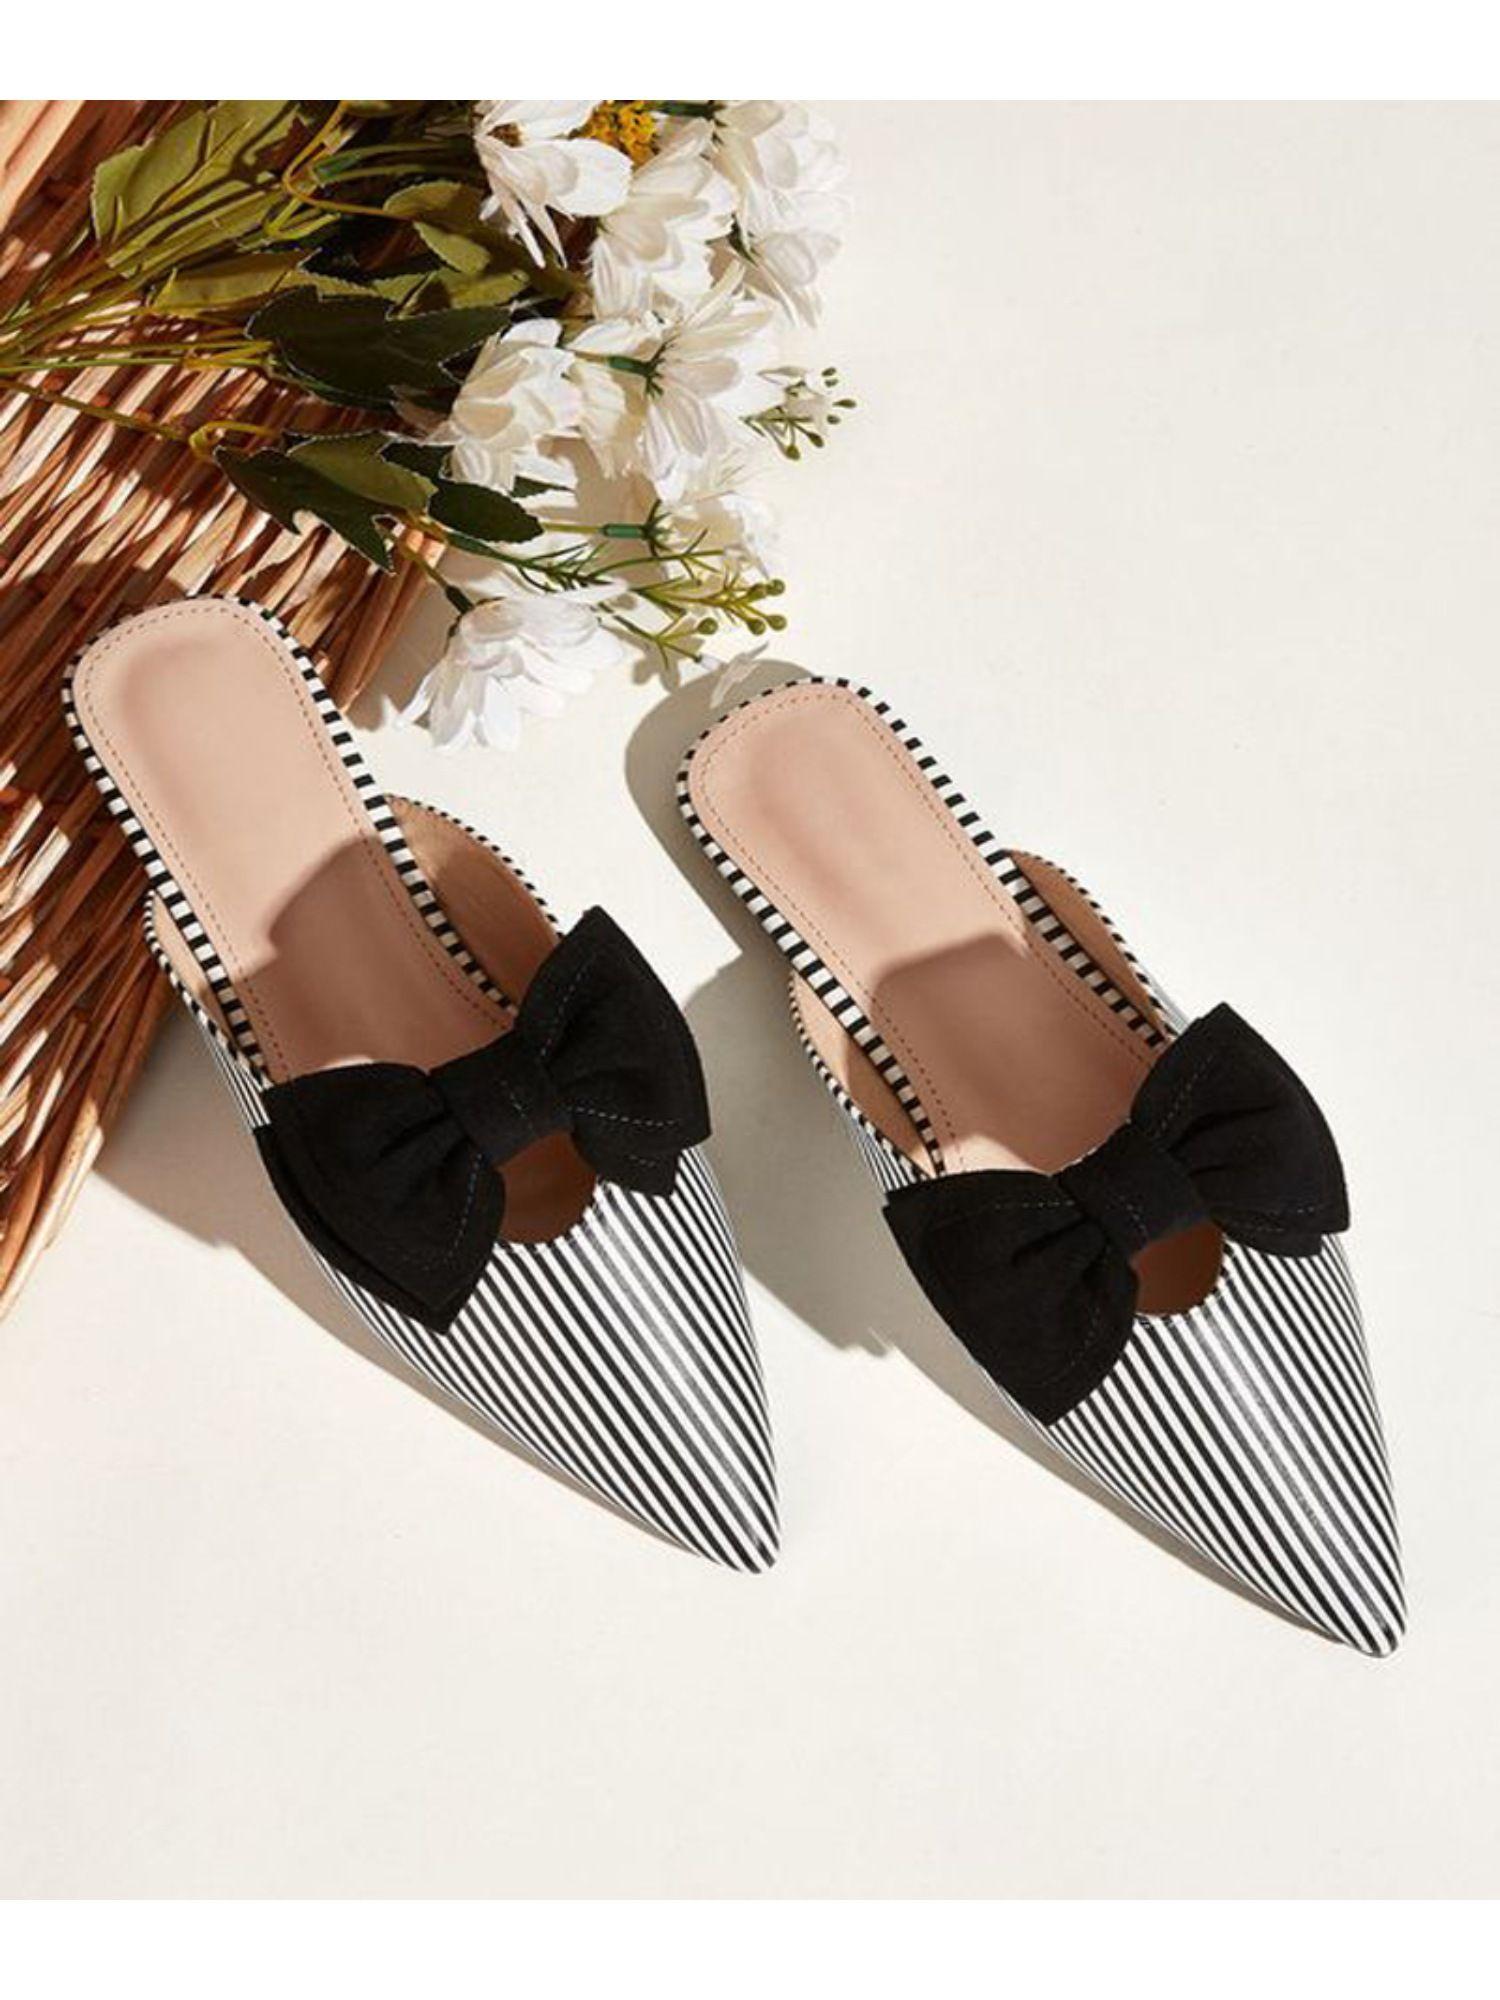 women black & white striped mules with bow